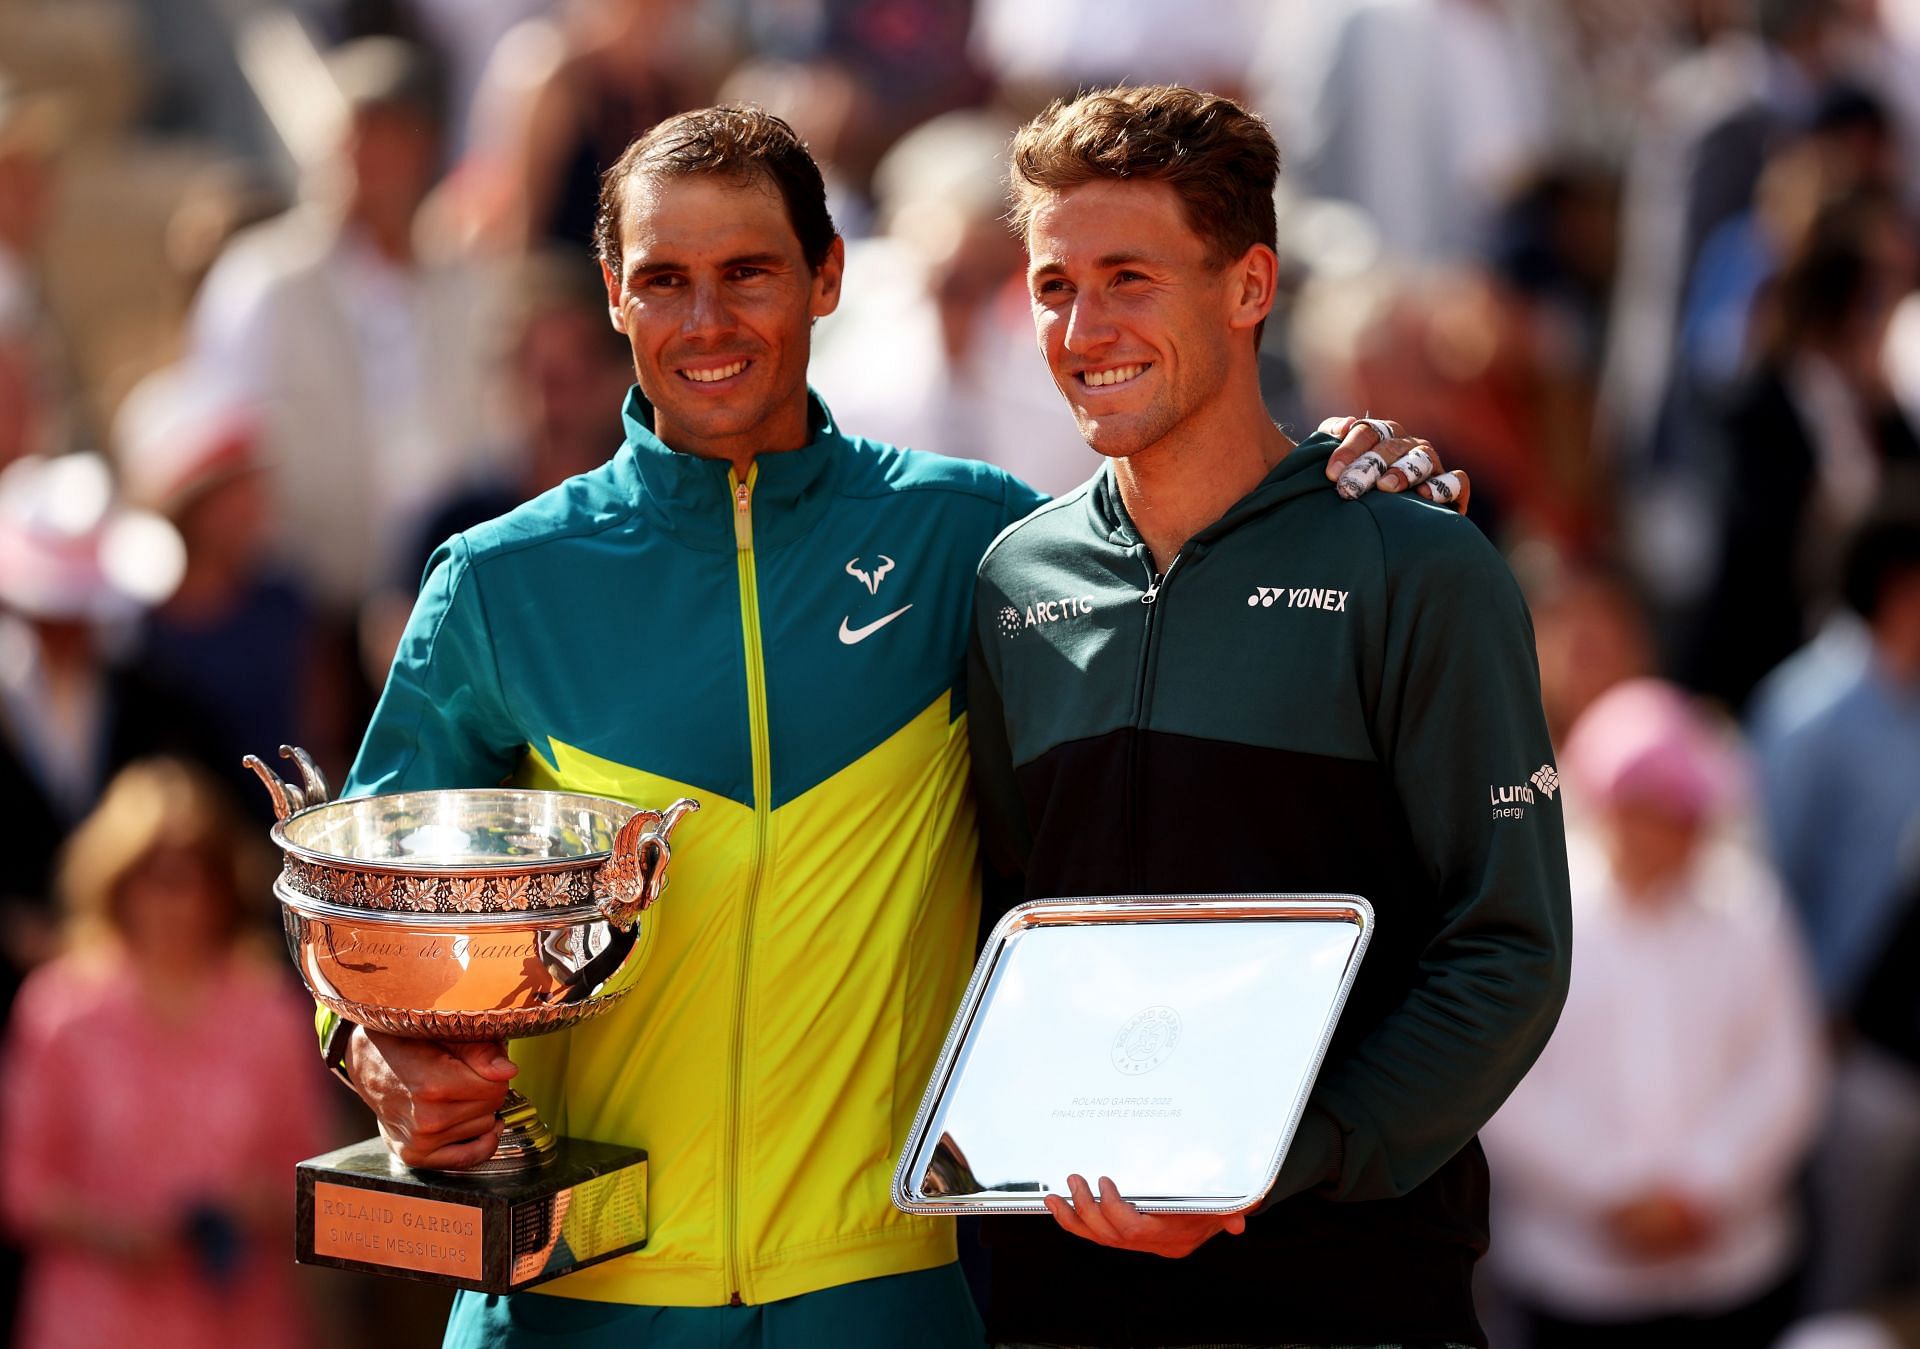 Rafael Nadal and Casper Ruud at the 2022 French Open trophy ceremony.